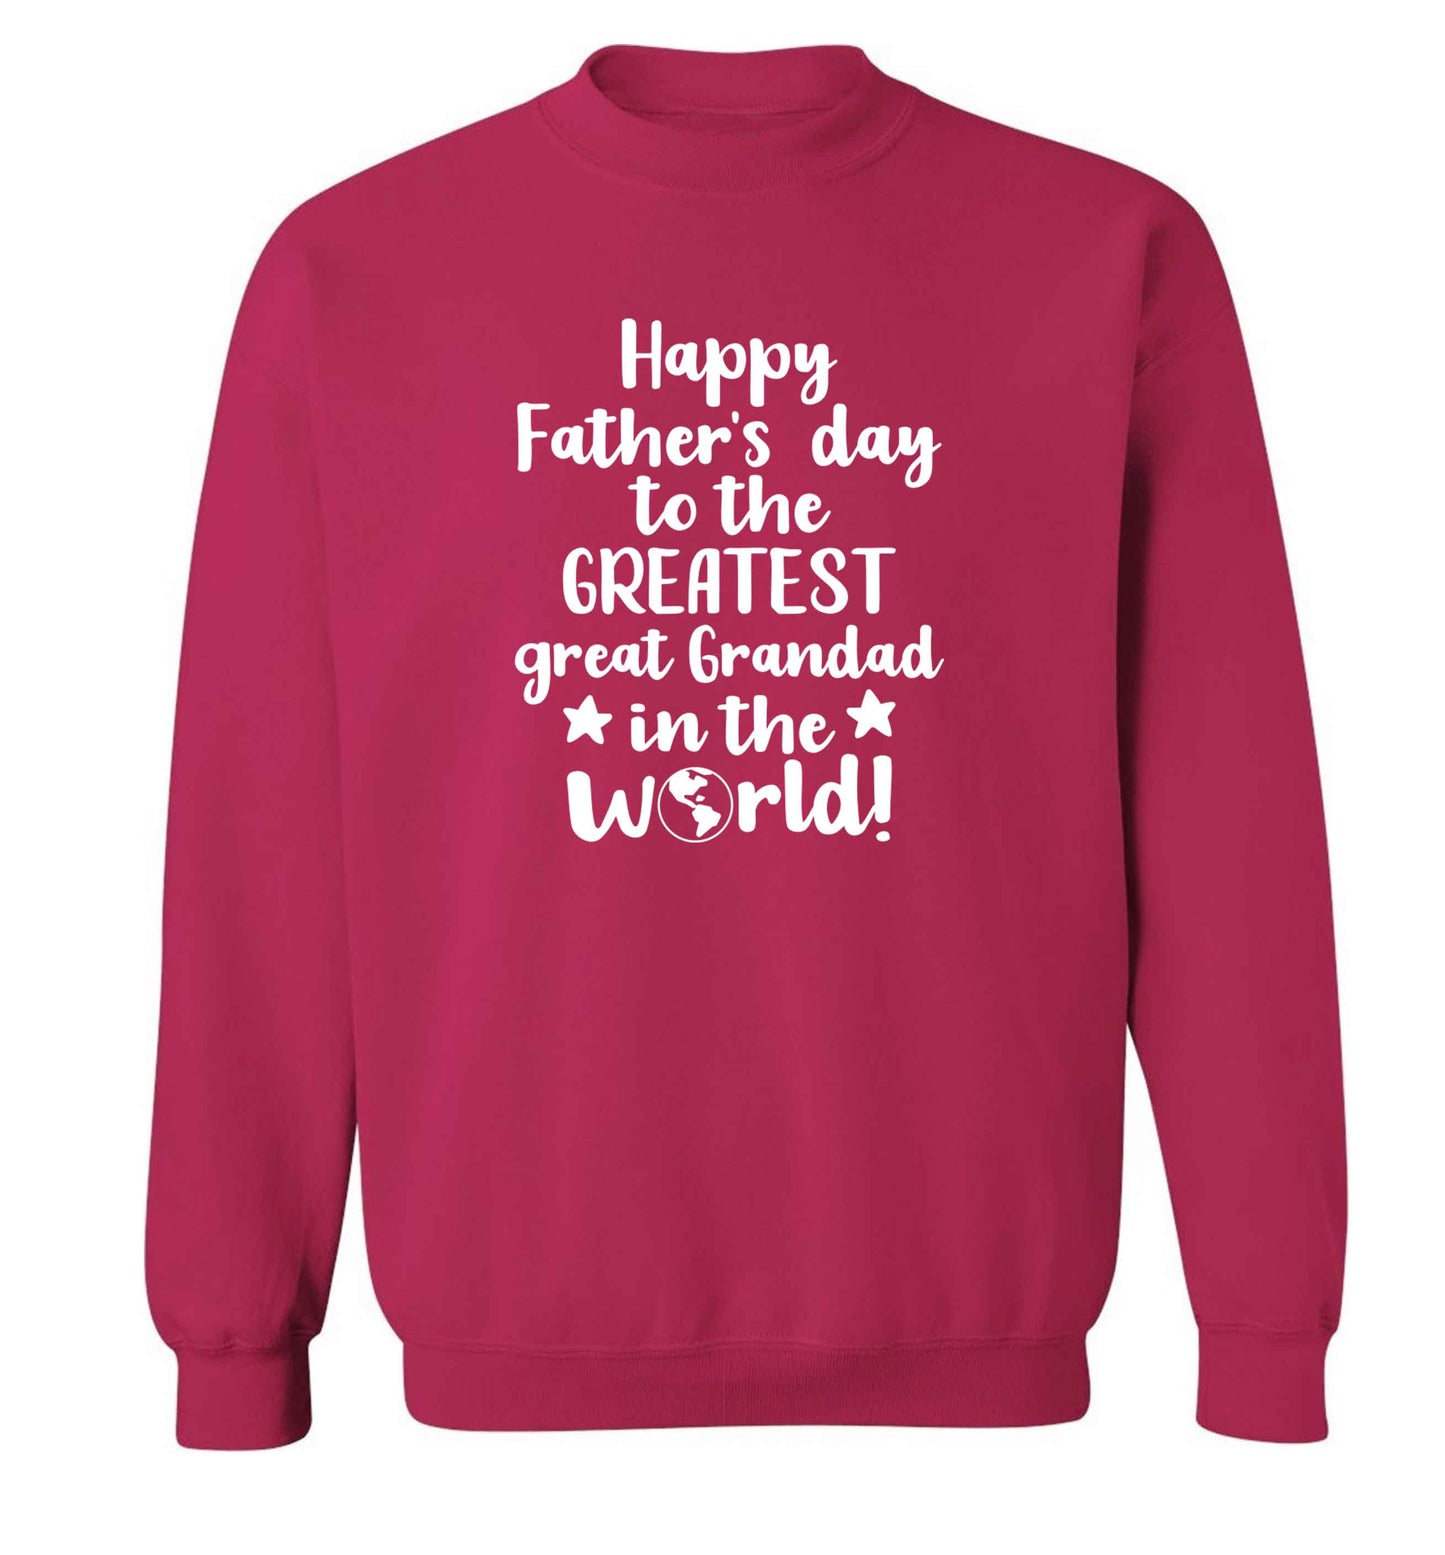 Happy Father's day to the greatest great grandad in the world adult's unisex pink sweater 2XL